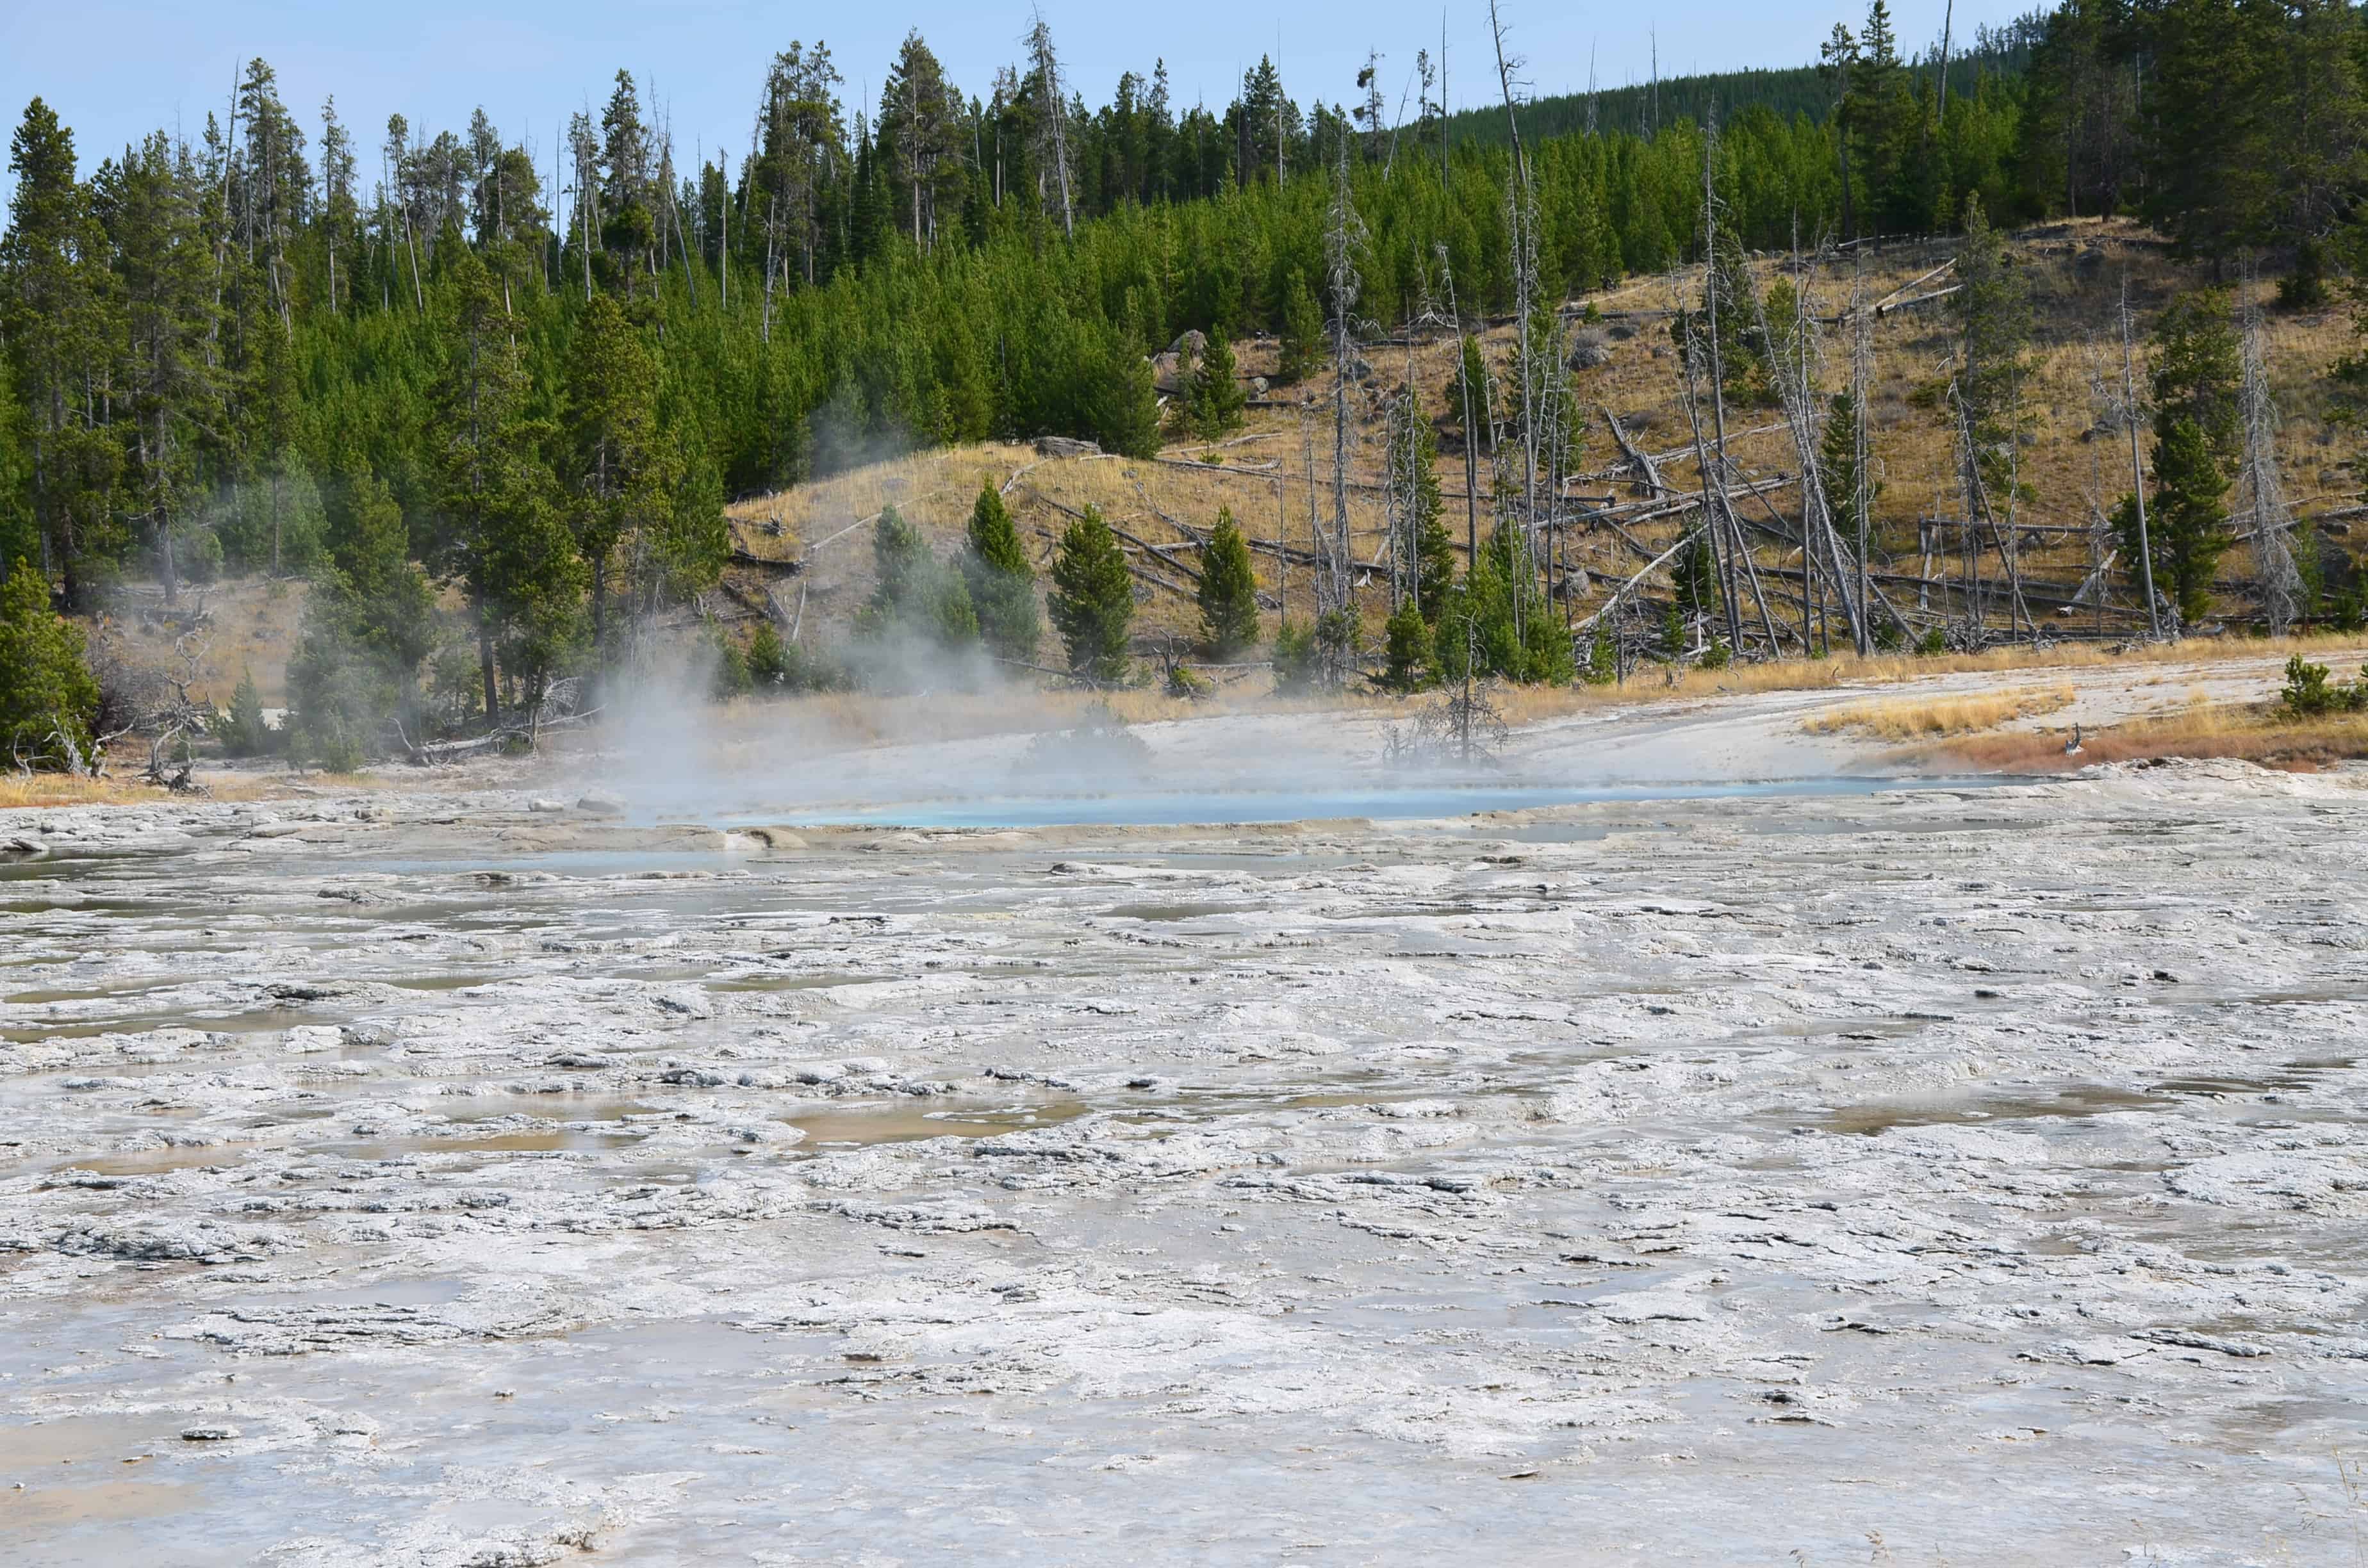 Oblong Geyser at the Upper Geyser Basin in Yellowstone National Park, Wyoming